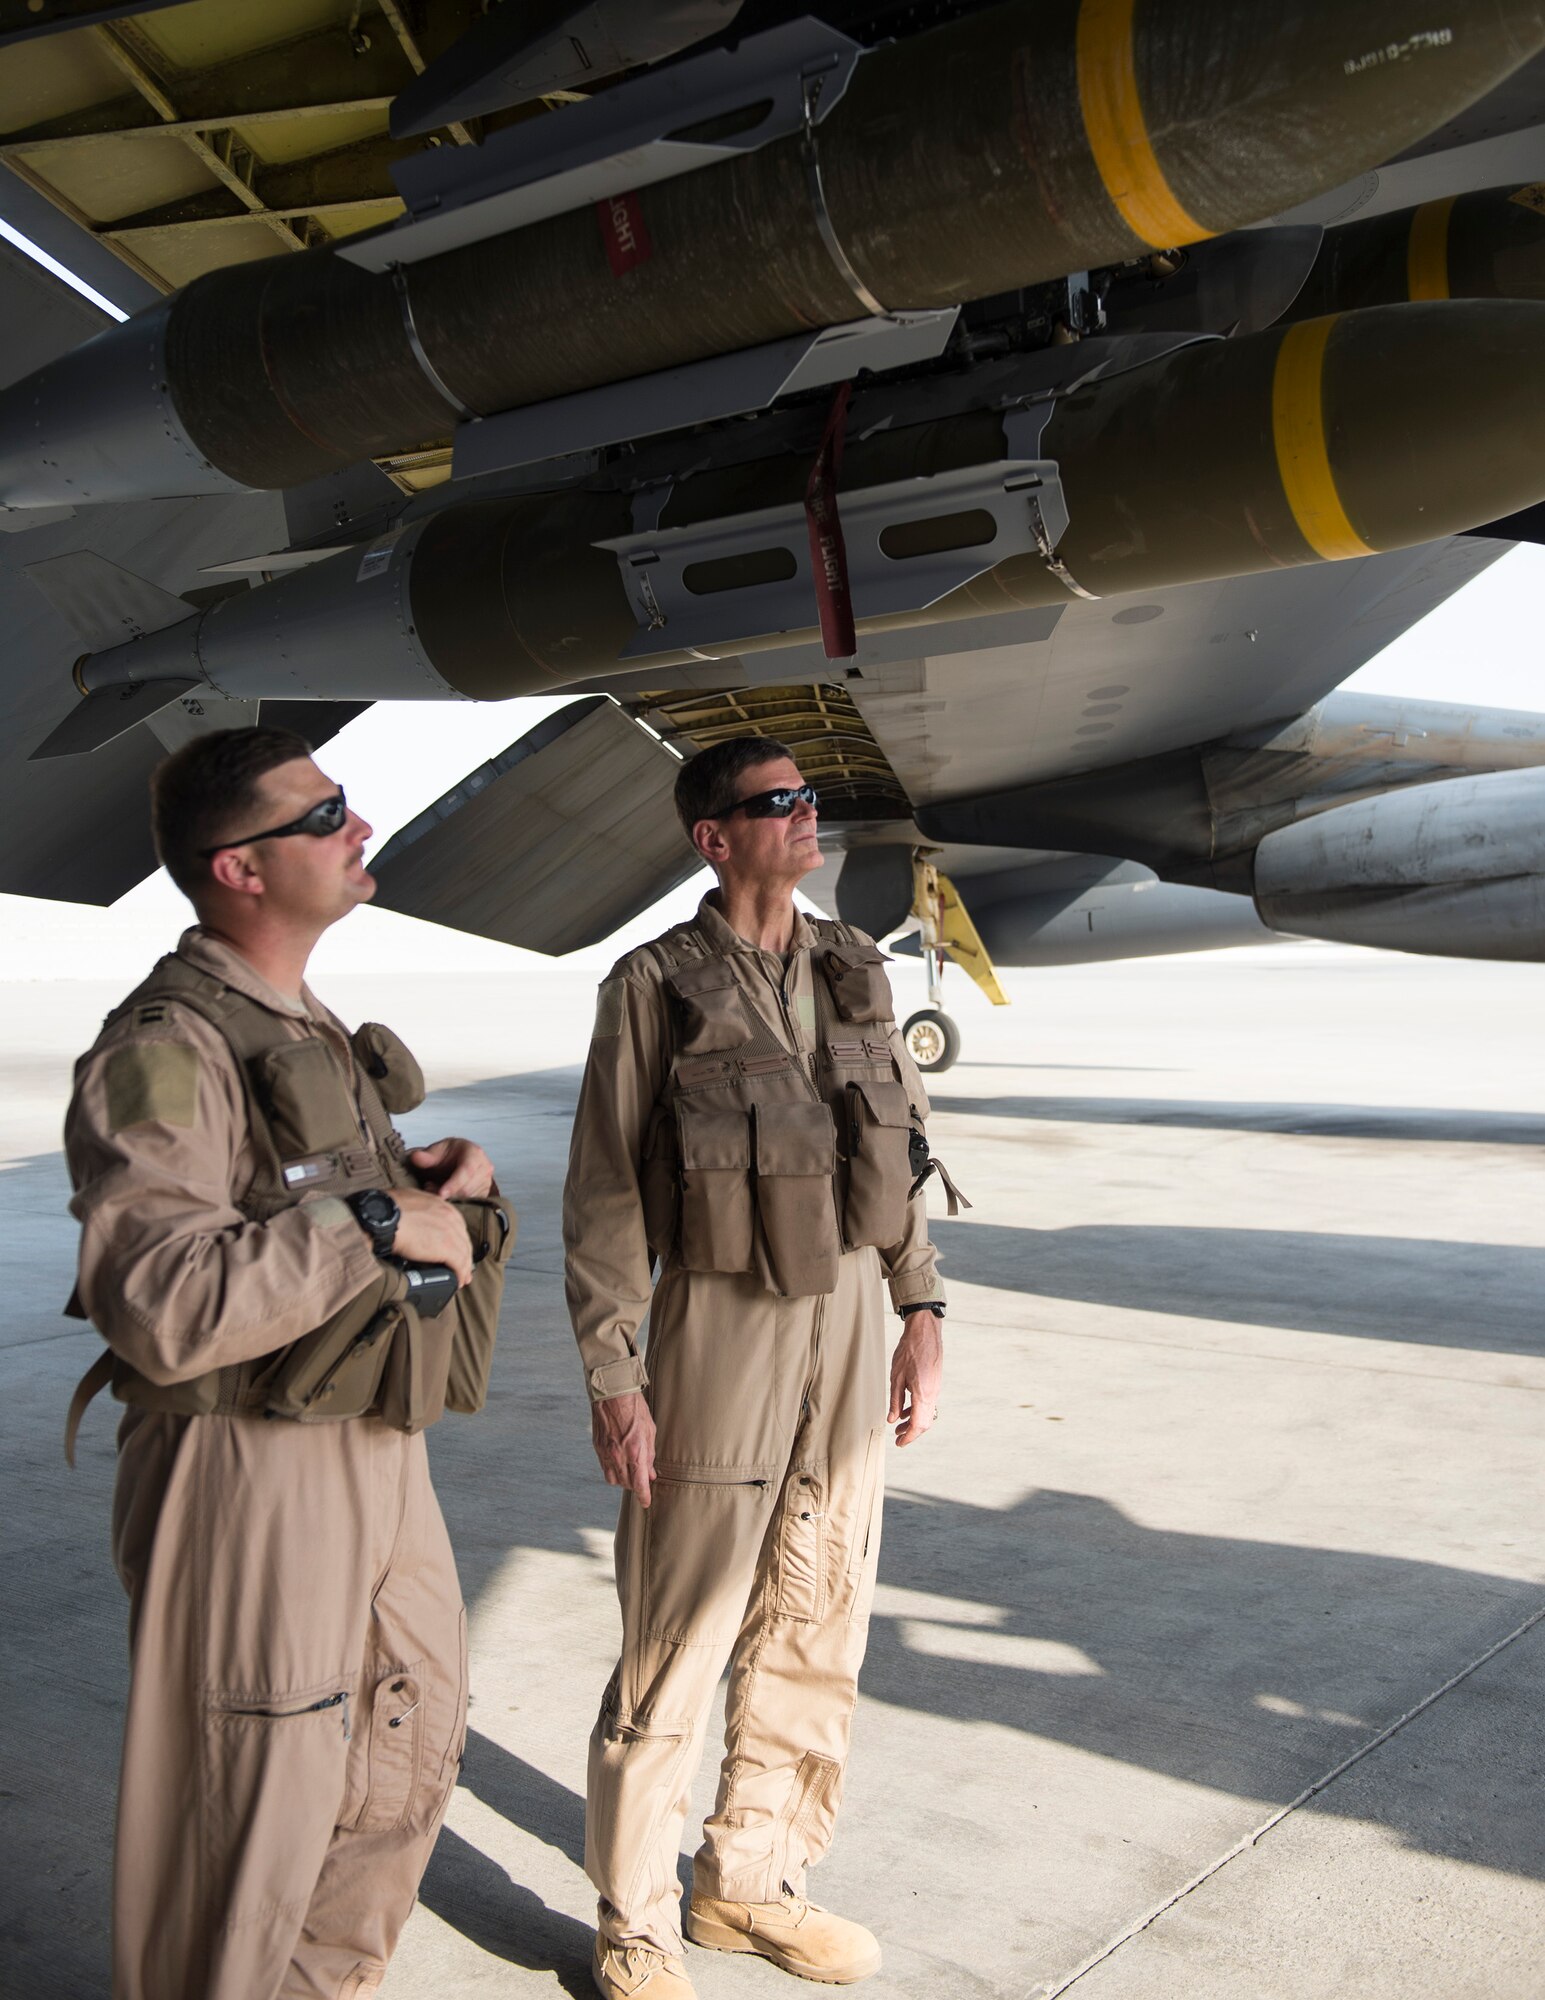 U.S. Army Gen. Joseph Votel, right, U.S. Central Command commander, listens to U.S. Air Force Capt. Micah McCracken, 69th Expeditionary Bomb Squadron aircraft commander, explain the capabilities of a B-52 Stratofortress at Al Udeid Air Base, Qatar, Sept. 8, 2017.